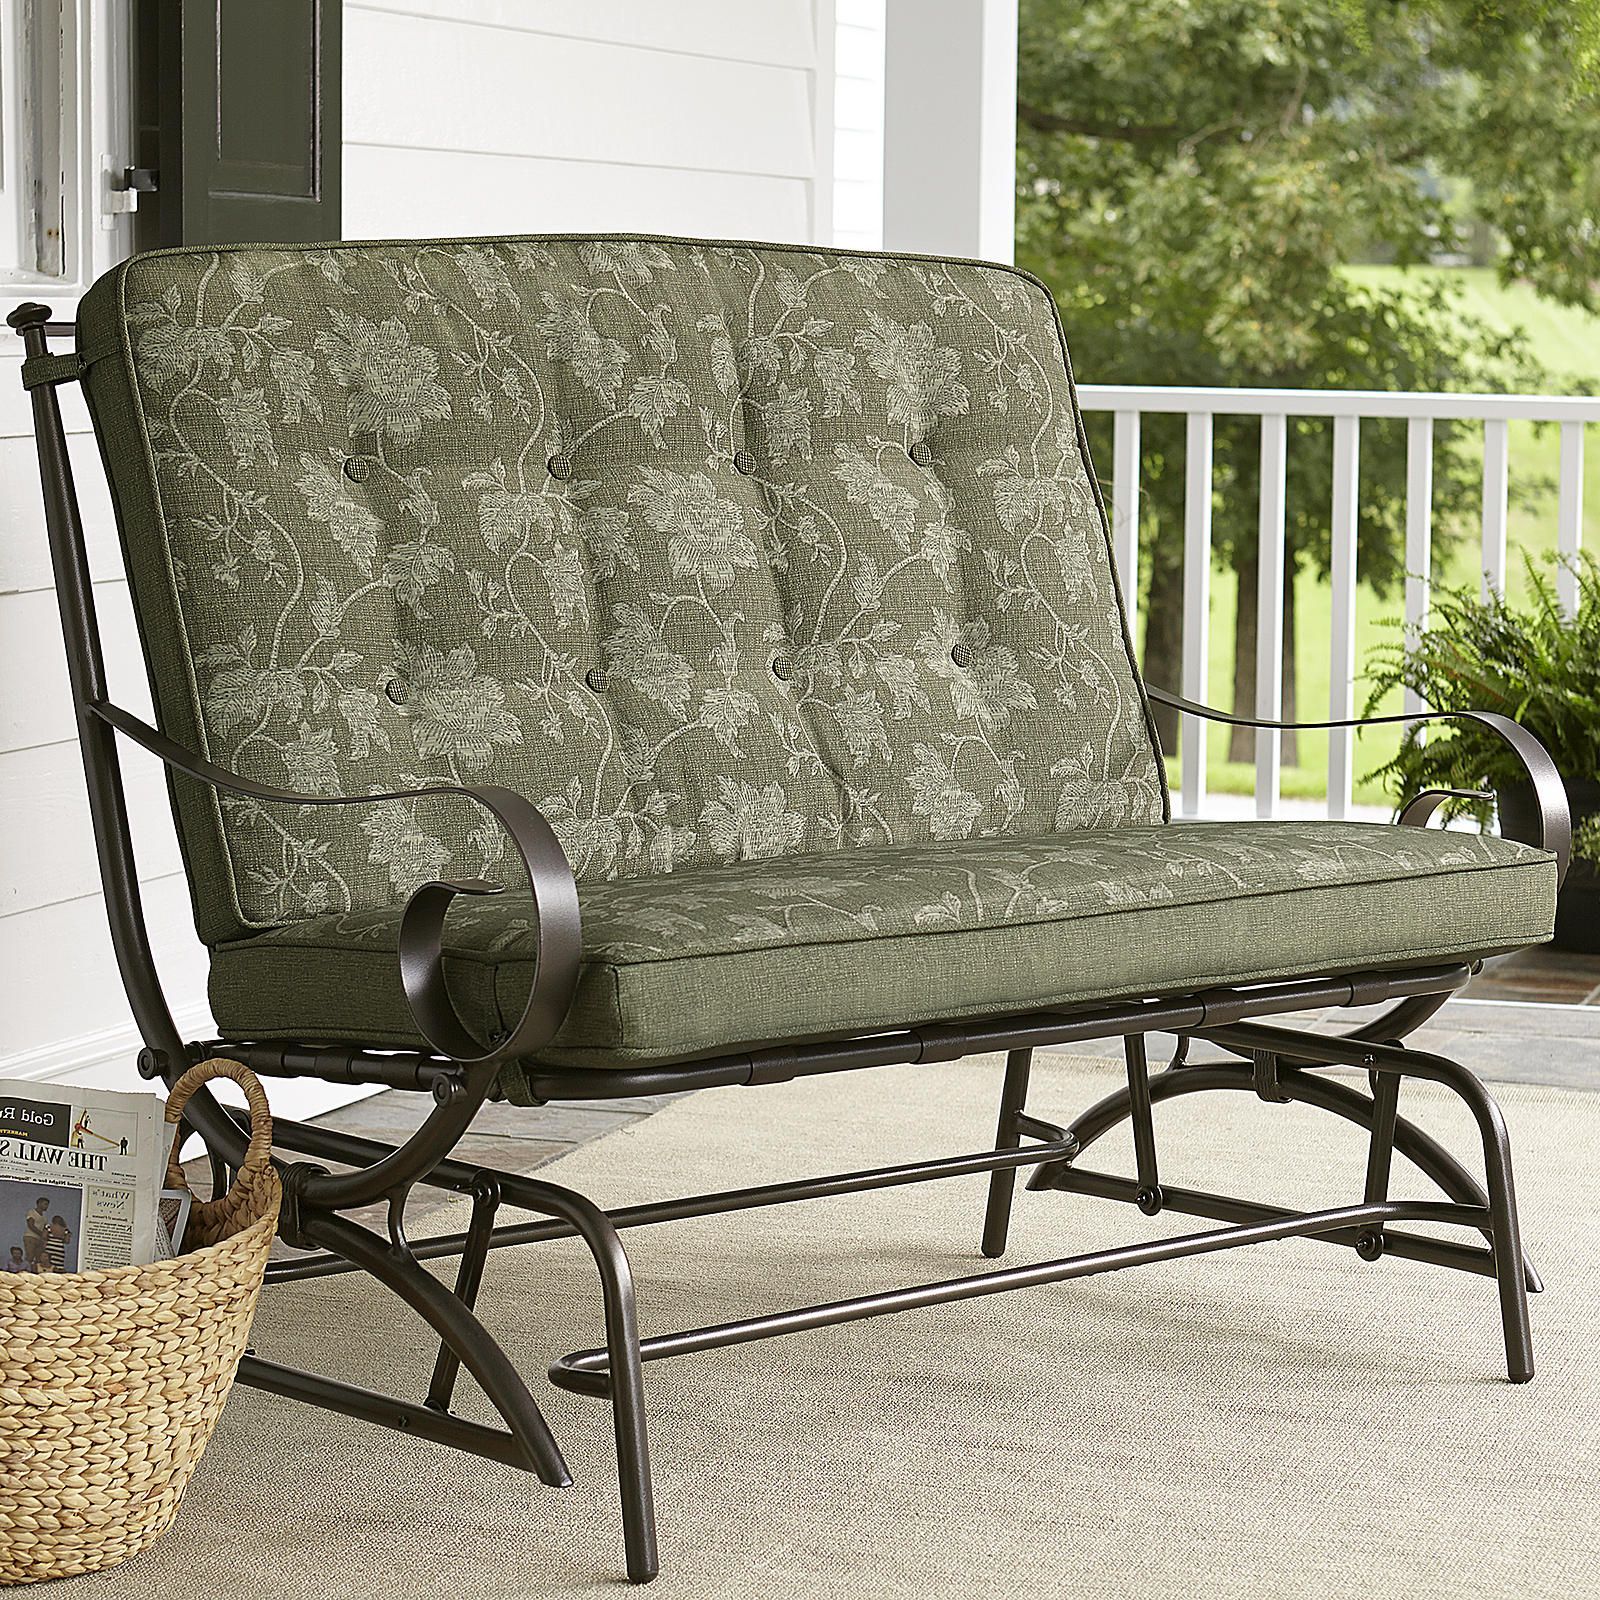 Jaclyn Smith Cora Cushion Double Glider – Outdoor Living Inside Rocking Glider Benches With Cushions (View 5 of 25)